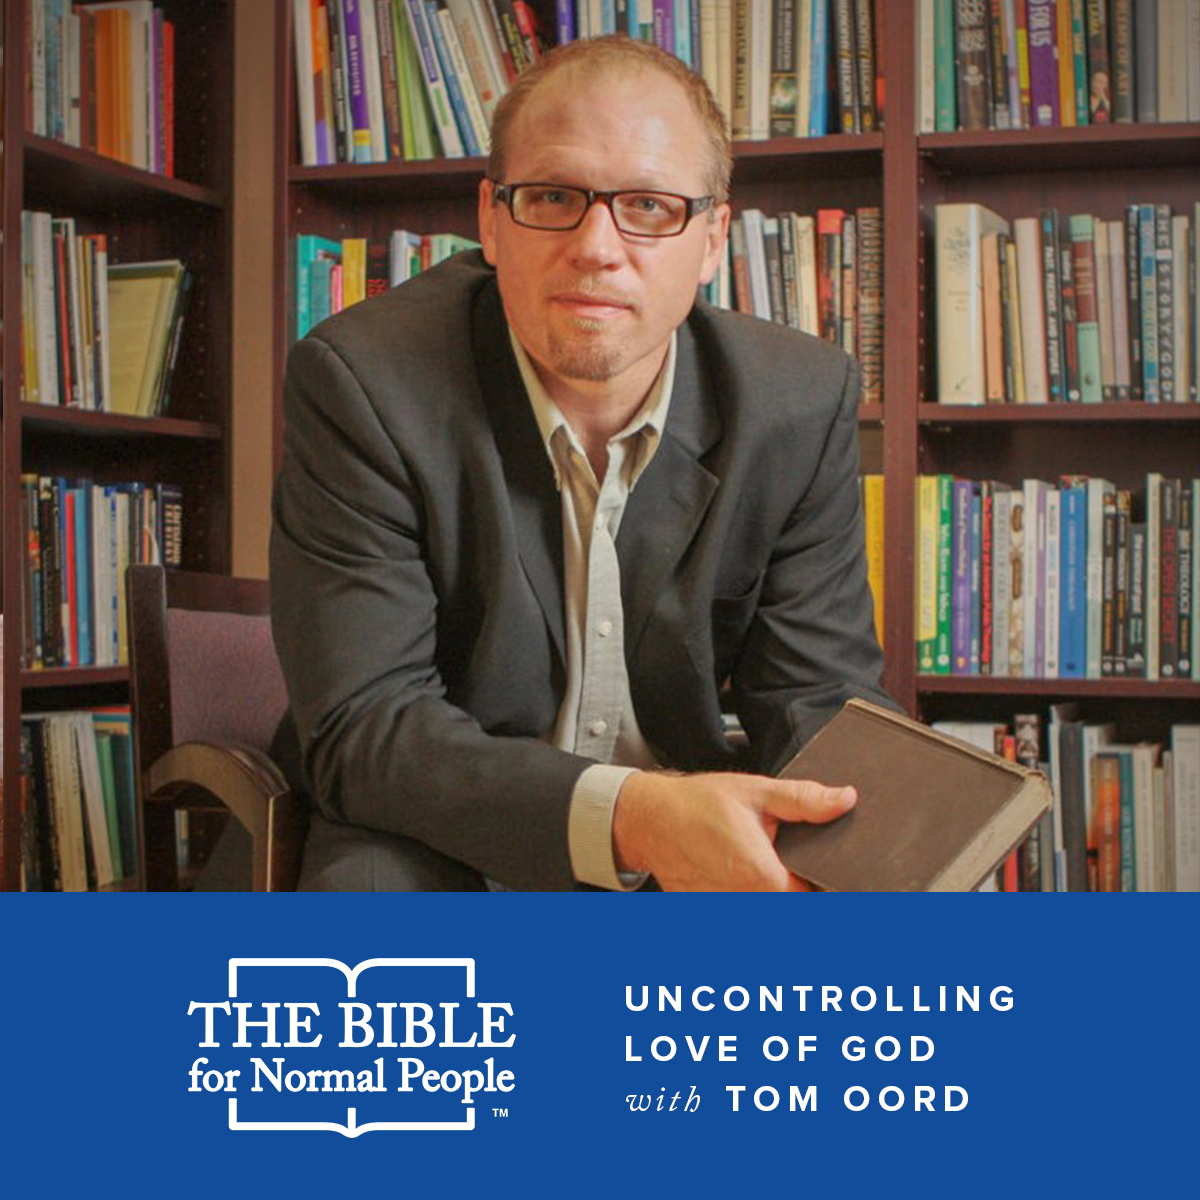 Interview with Tom Oord: The Uncontrolling Love of God